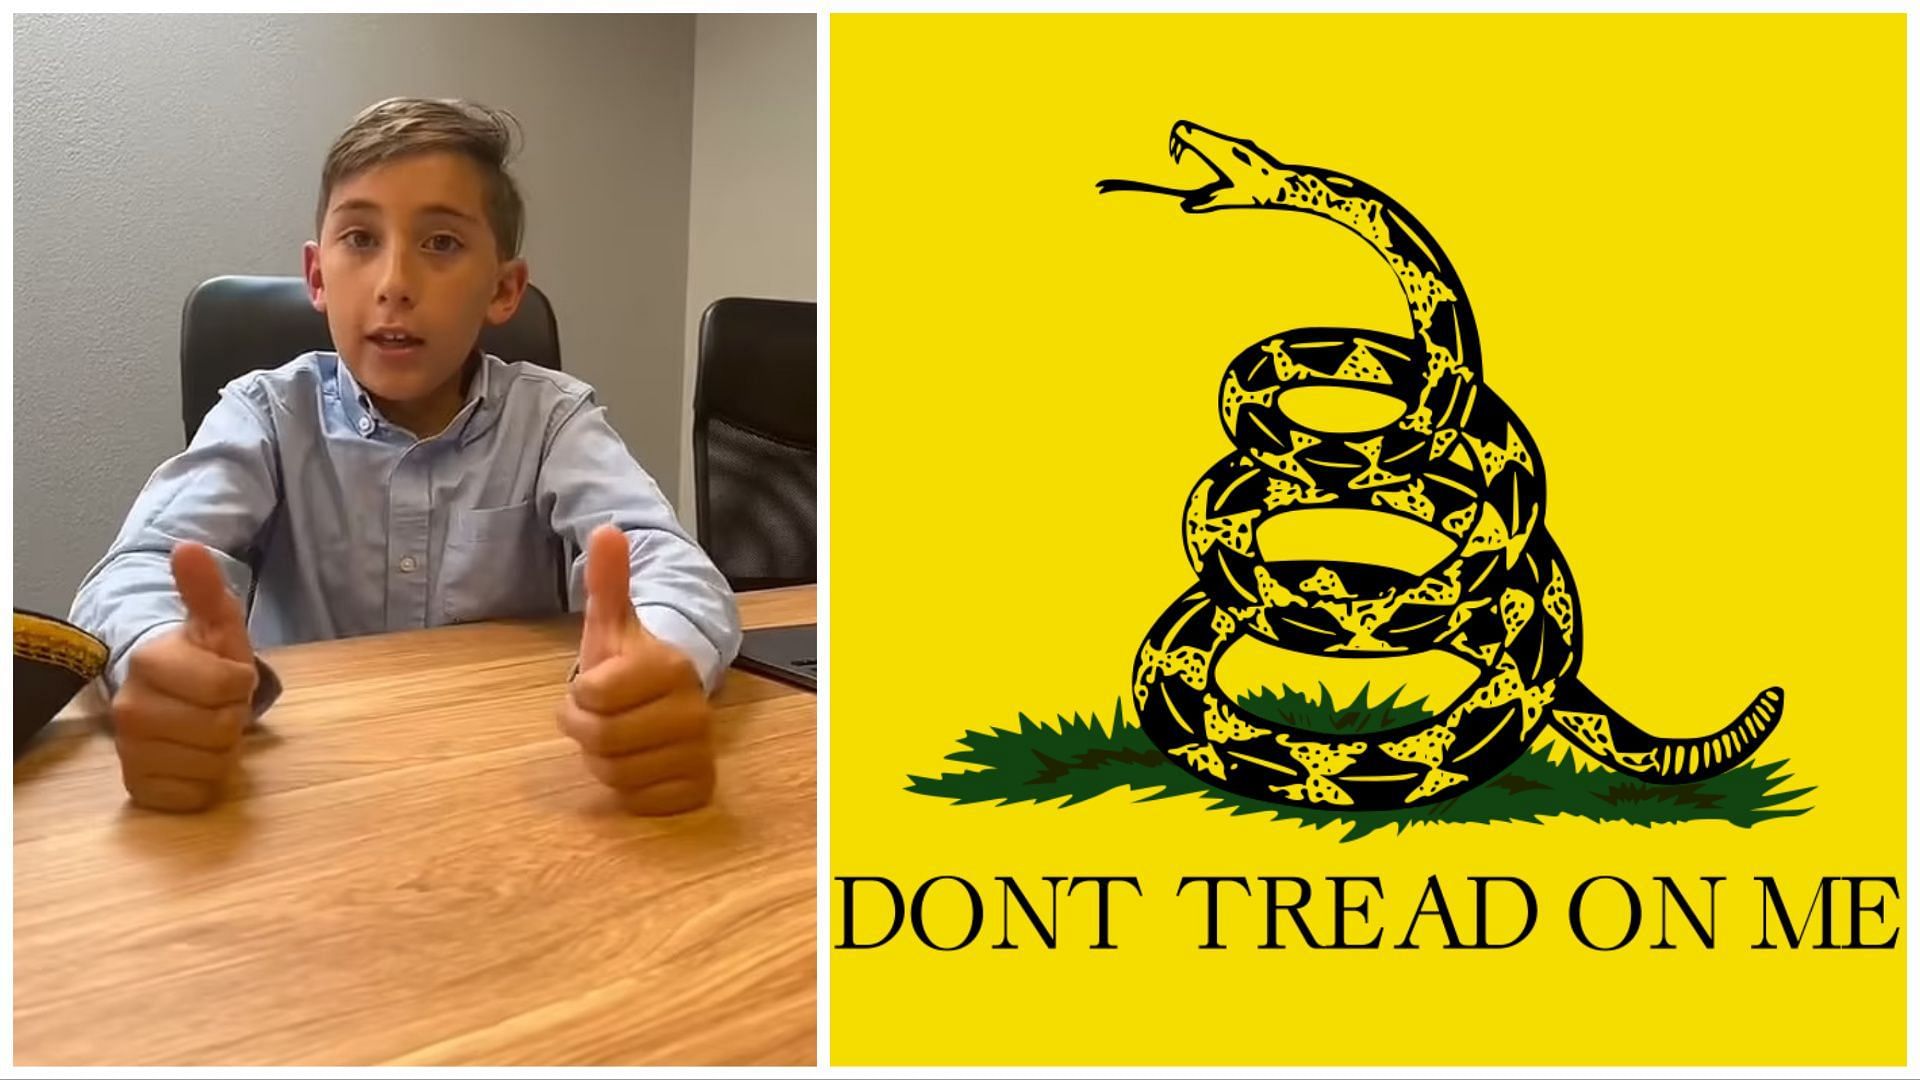 The 12-year-old was asked to remove the Gadsden flag patch (Image via X / @cboyack / Wikipedia)